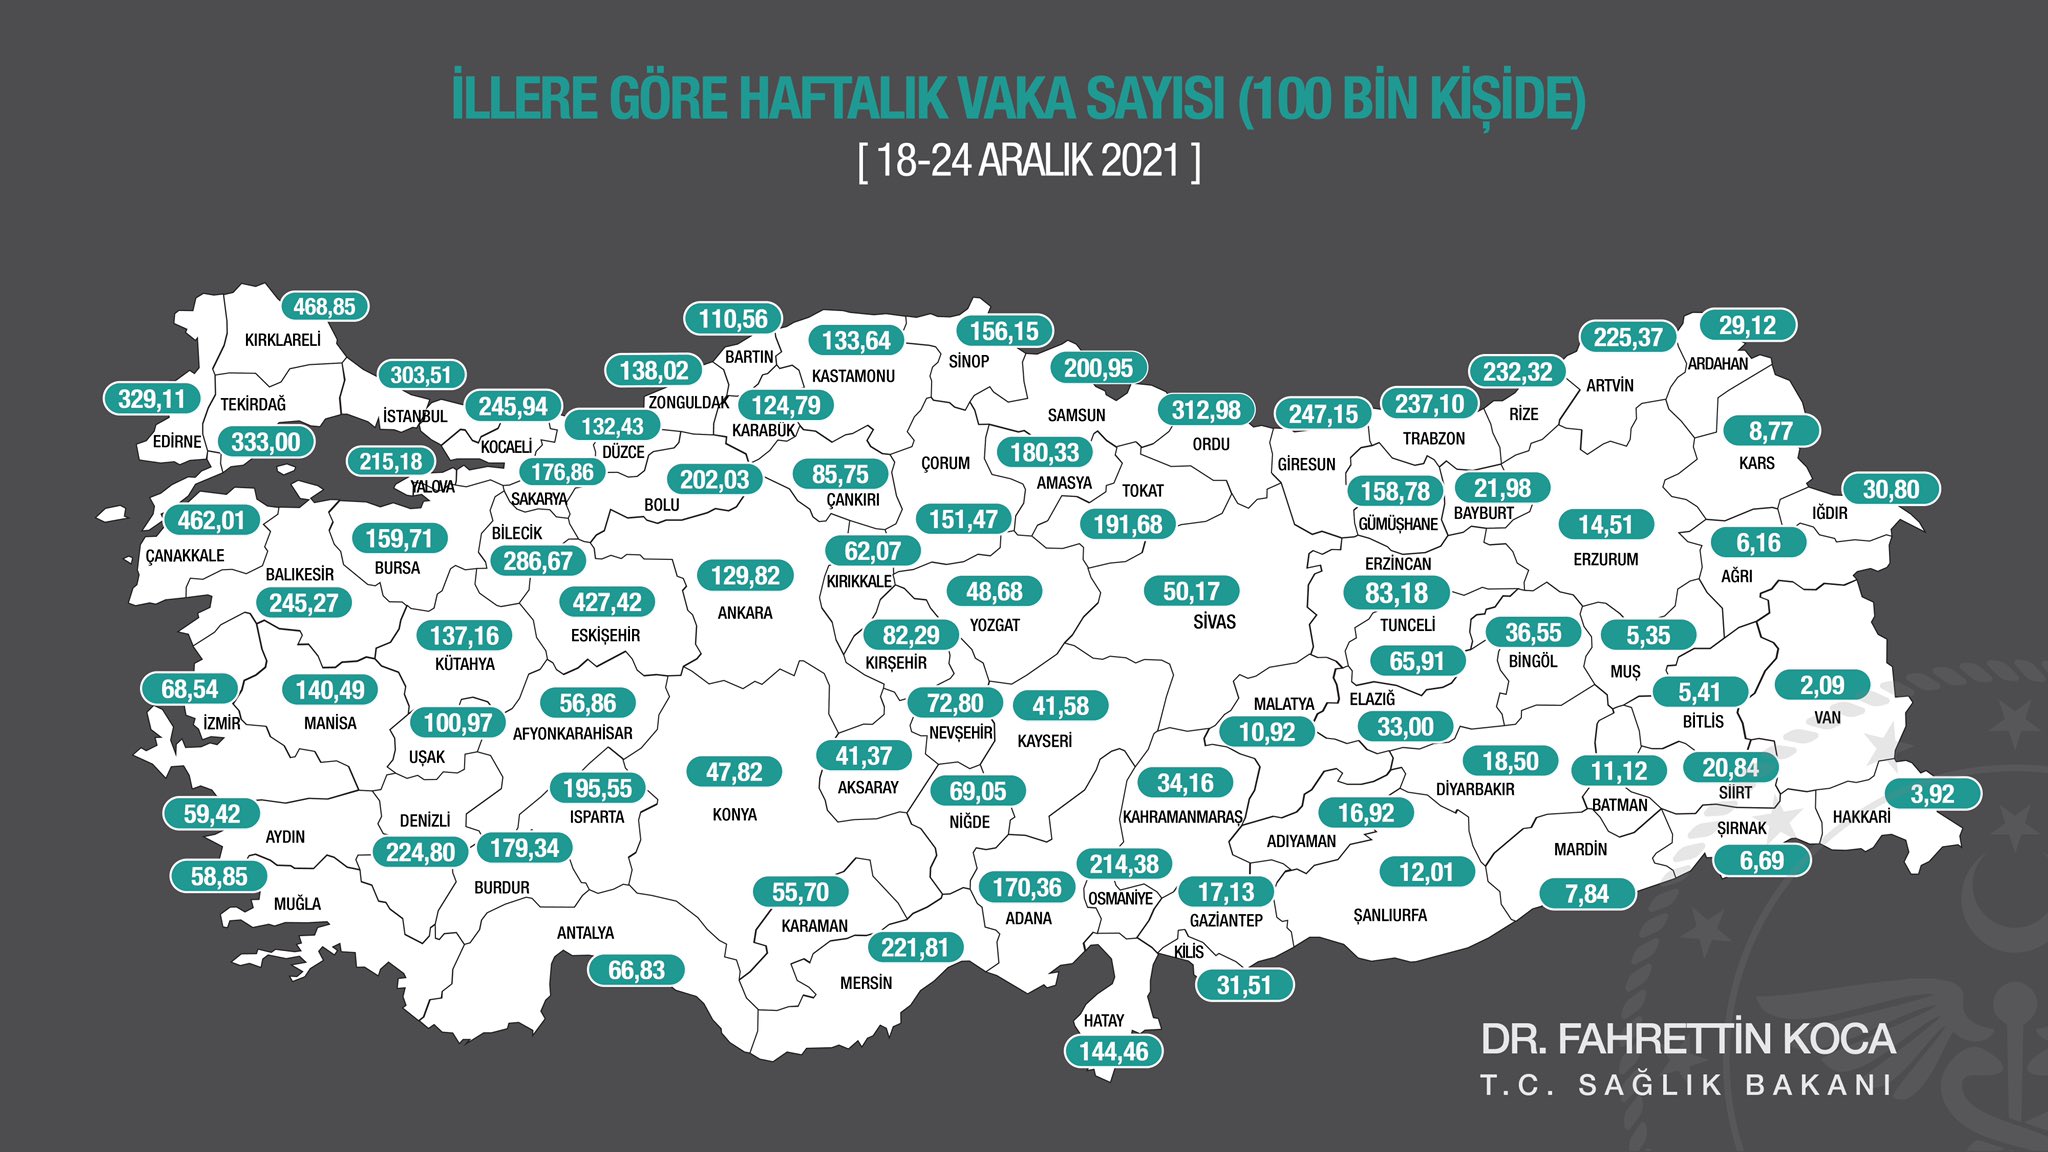 Weekly COVID-19 cases in Turkey by provinces: Increase in İstanbul